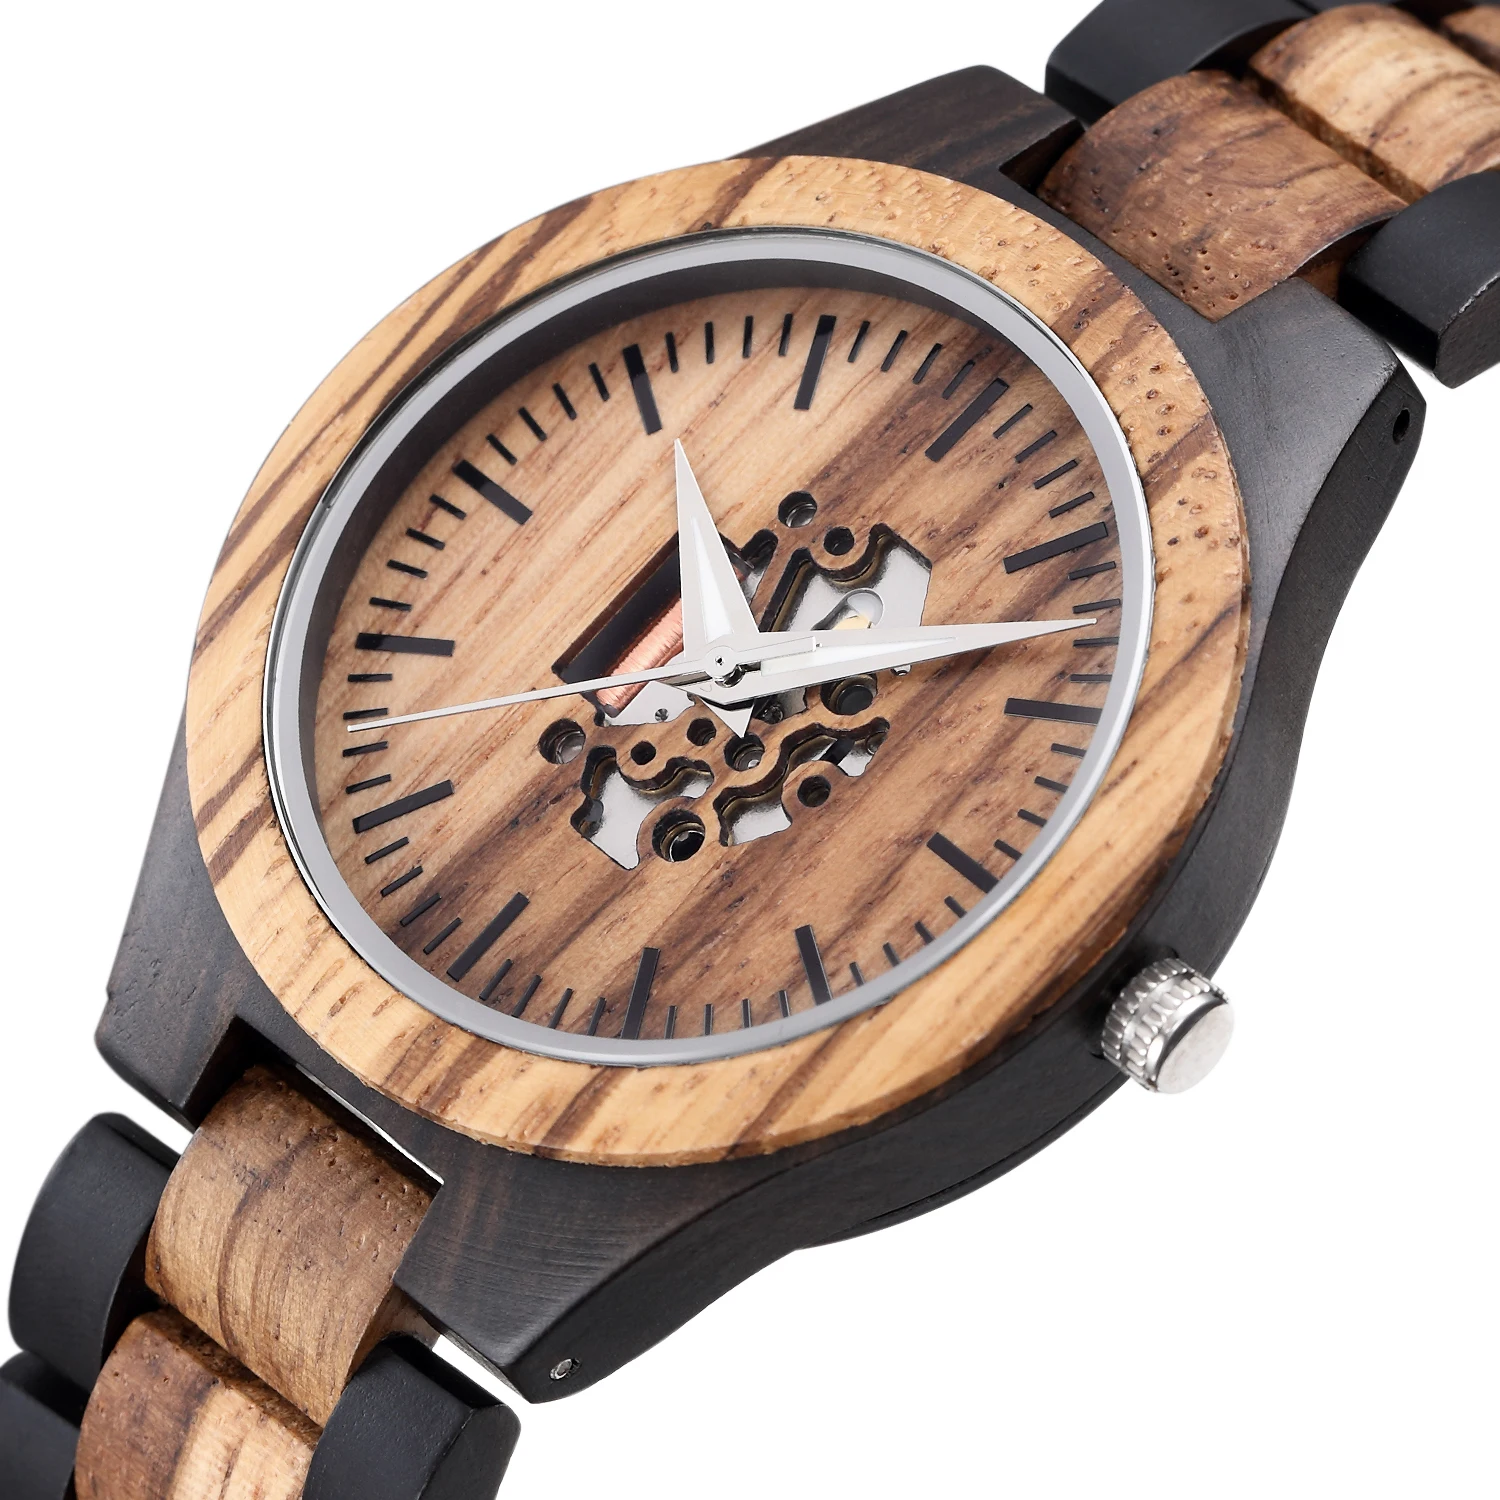 Mechanical Wooden Watch, Anniversary Gift for Him, Wood Watch, Engraved  Watch, Wooden Watch, Groomsmen Watch, Boyfriend Gift, Gift for Dad - Etsy |  Wooden watch, Watch engraving, Wood watch